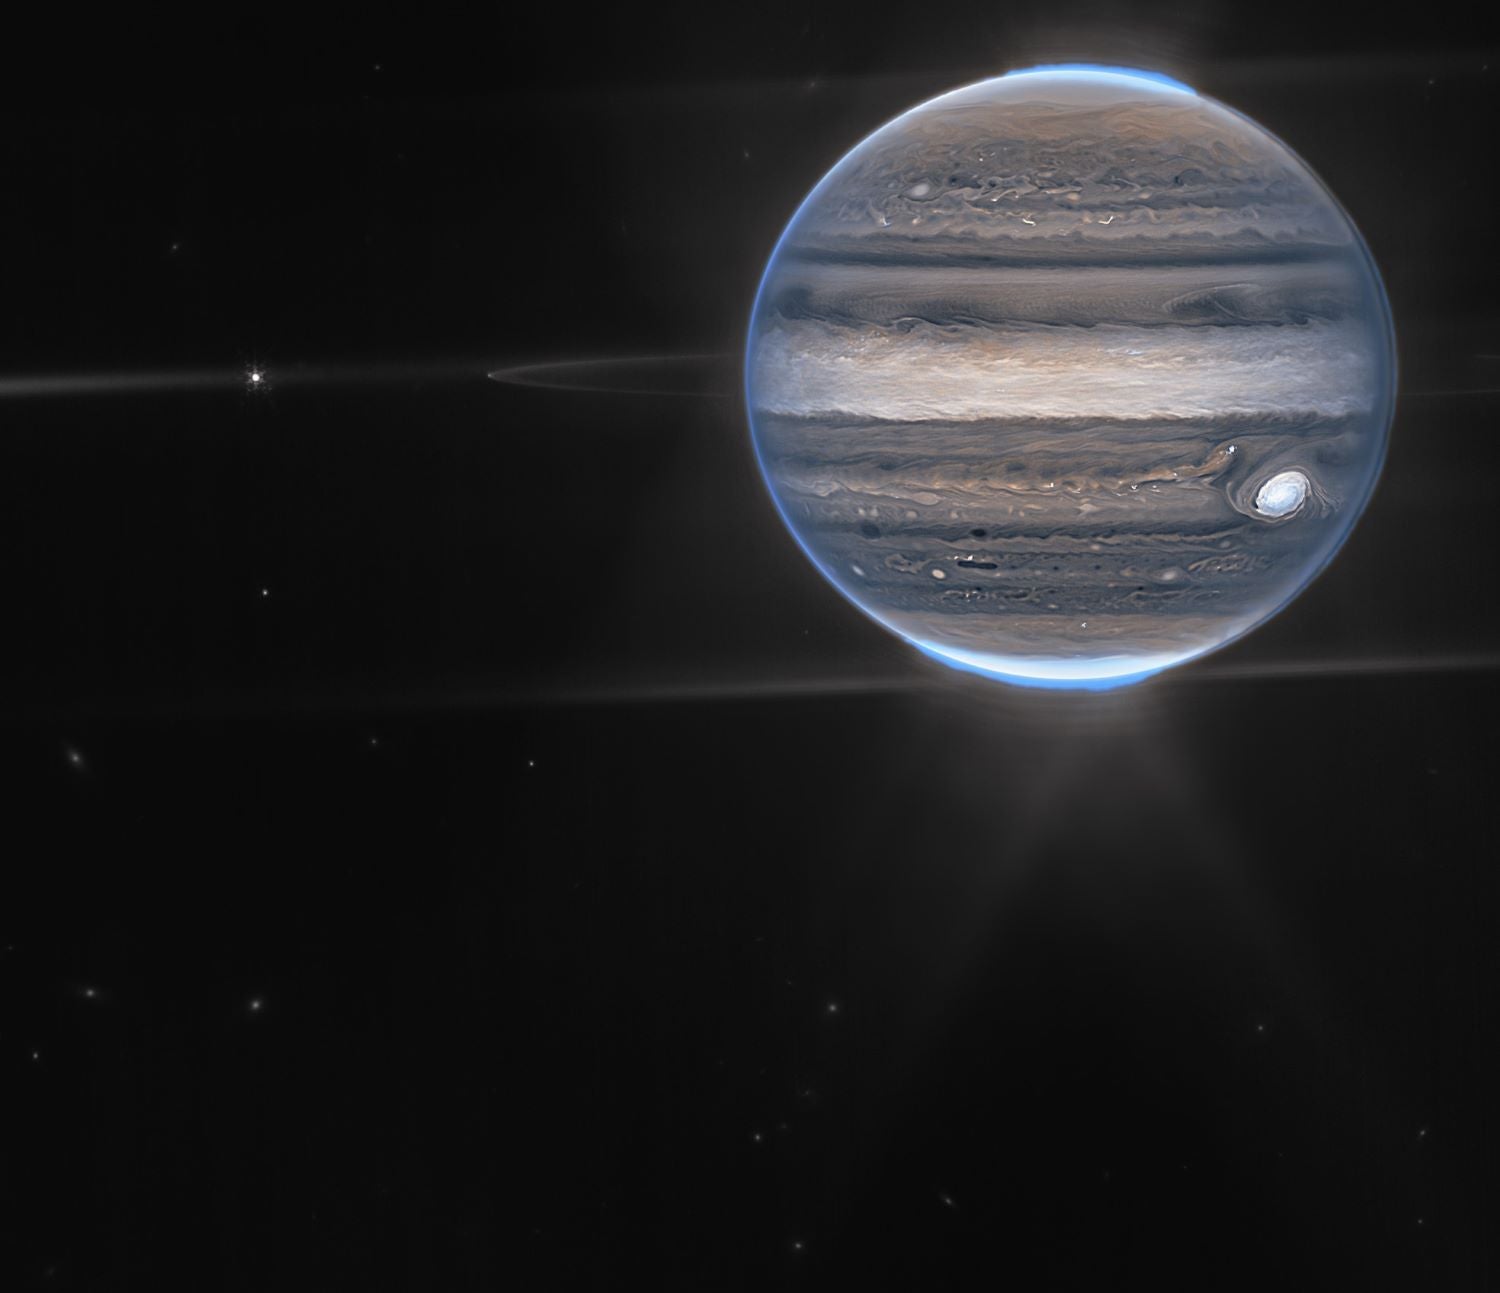 The gas giant Jupiter gives off shining infrared light.